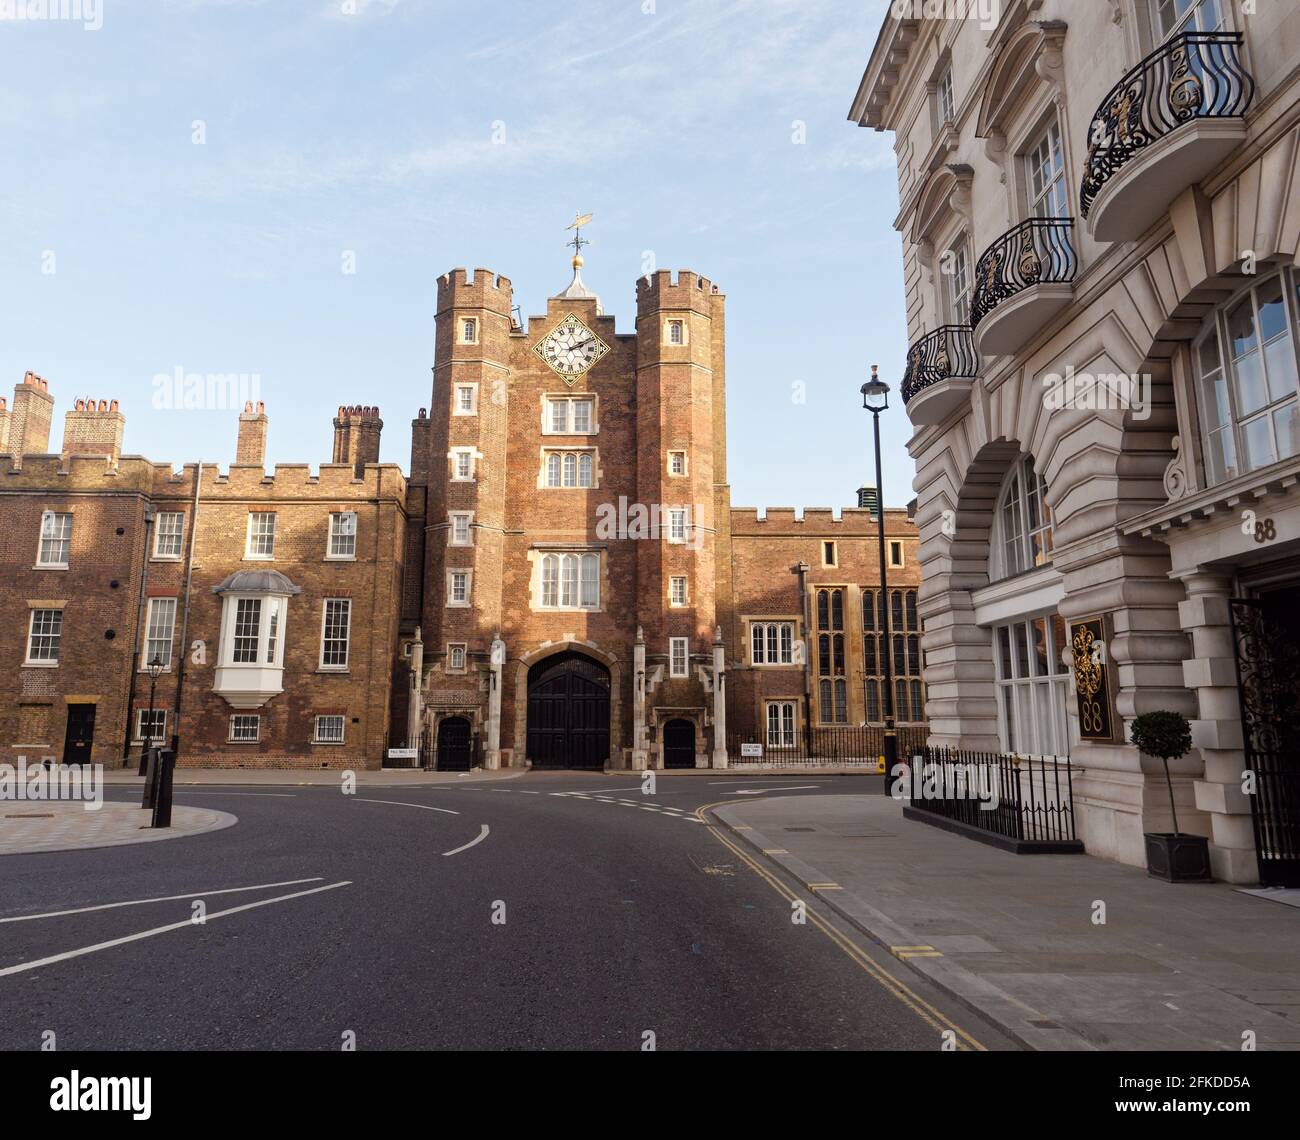 London, Greater London, England - Apr 24 2021: St James's Palace facade at the corner of Pall Mall and St James's Street with a property with a balcon Stock Photo